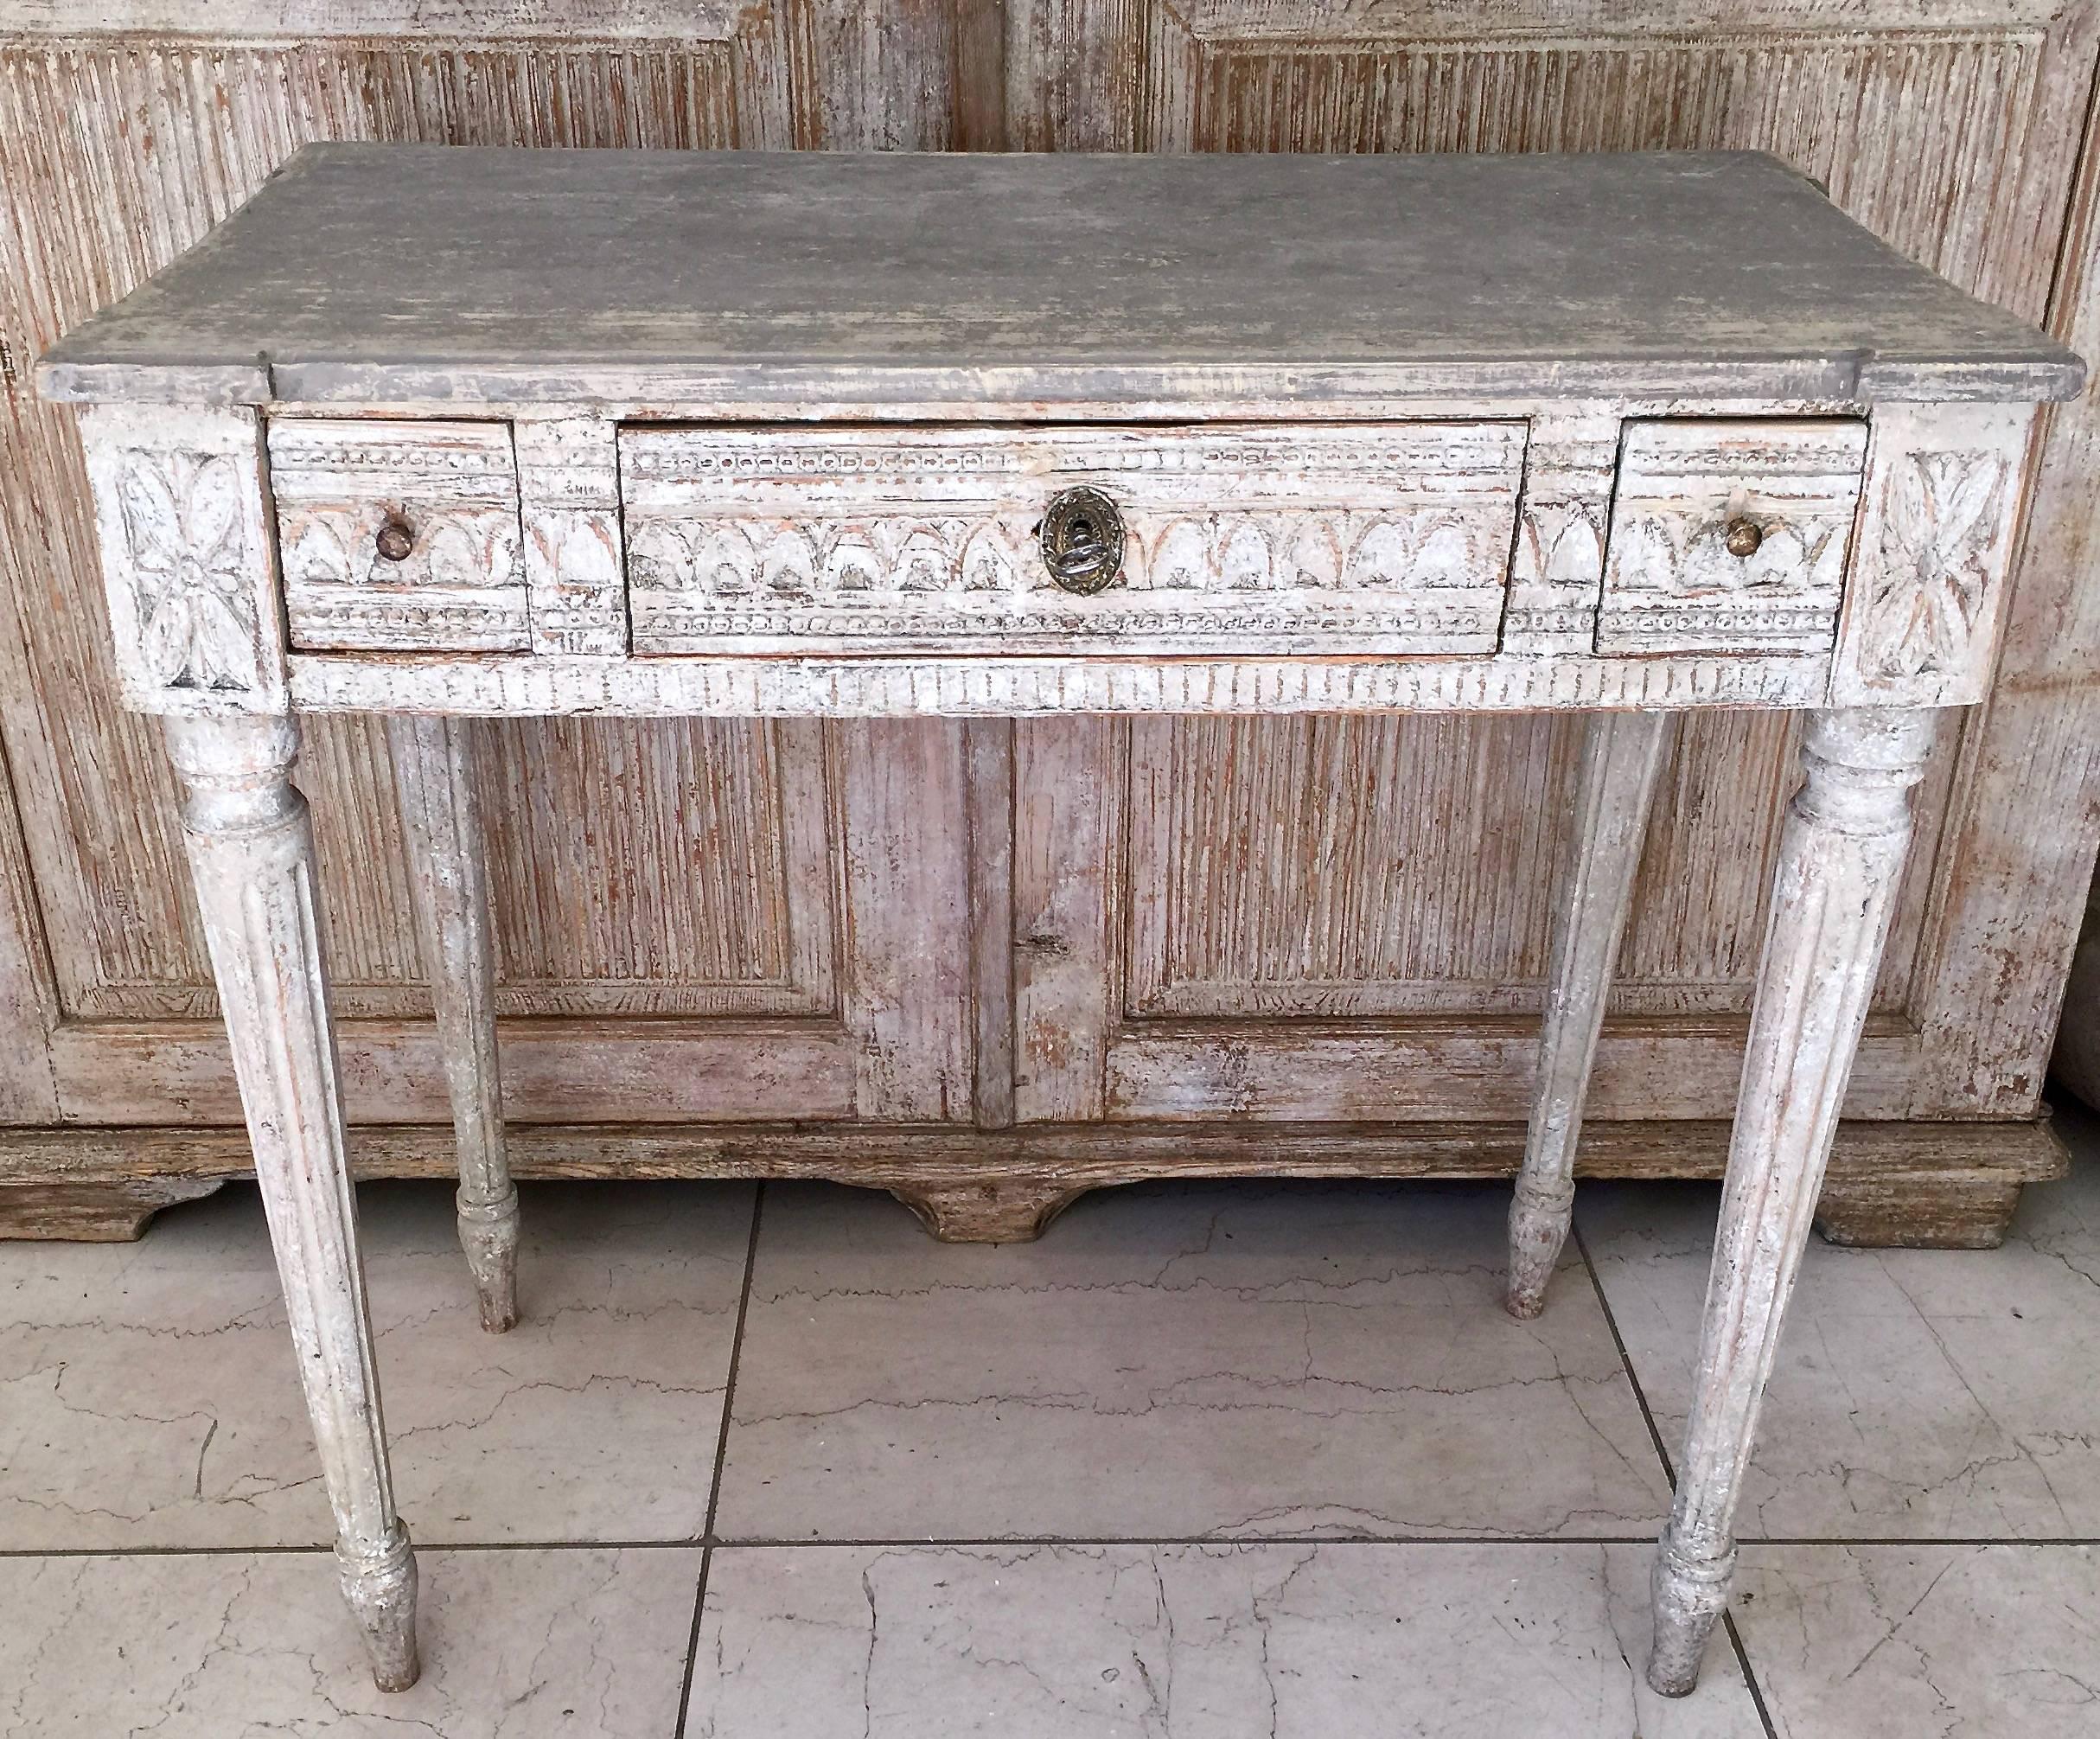 Very elegant 18th century Swedish period Gustavian freestanding console or table with richly decorated with lamb’s tongue molding on all around of the apron with florets at the corner blocks, wonderful tapered and fluted legs. This skillfully carved